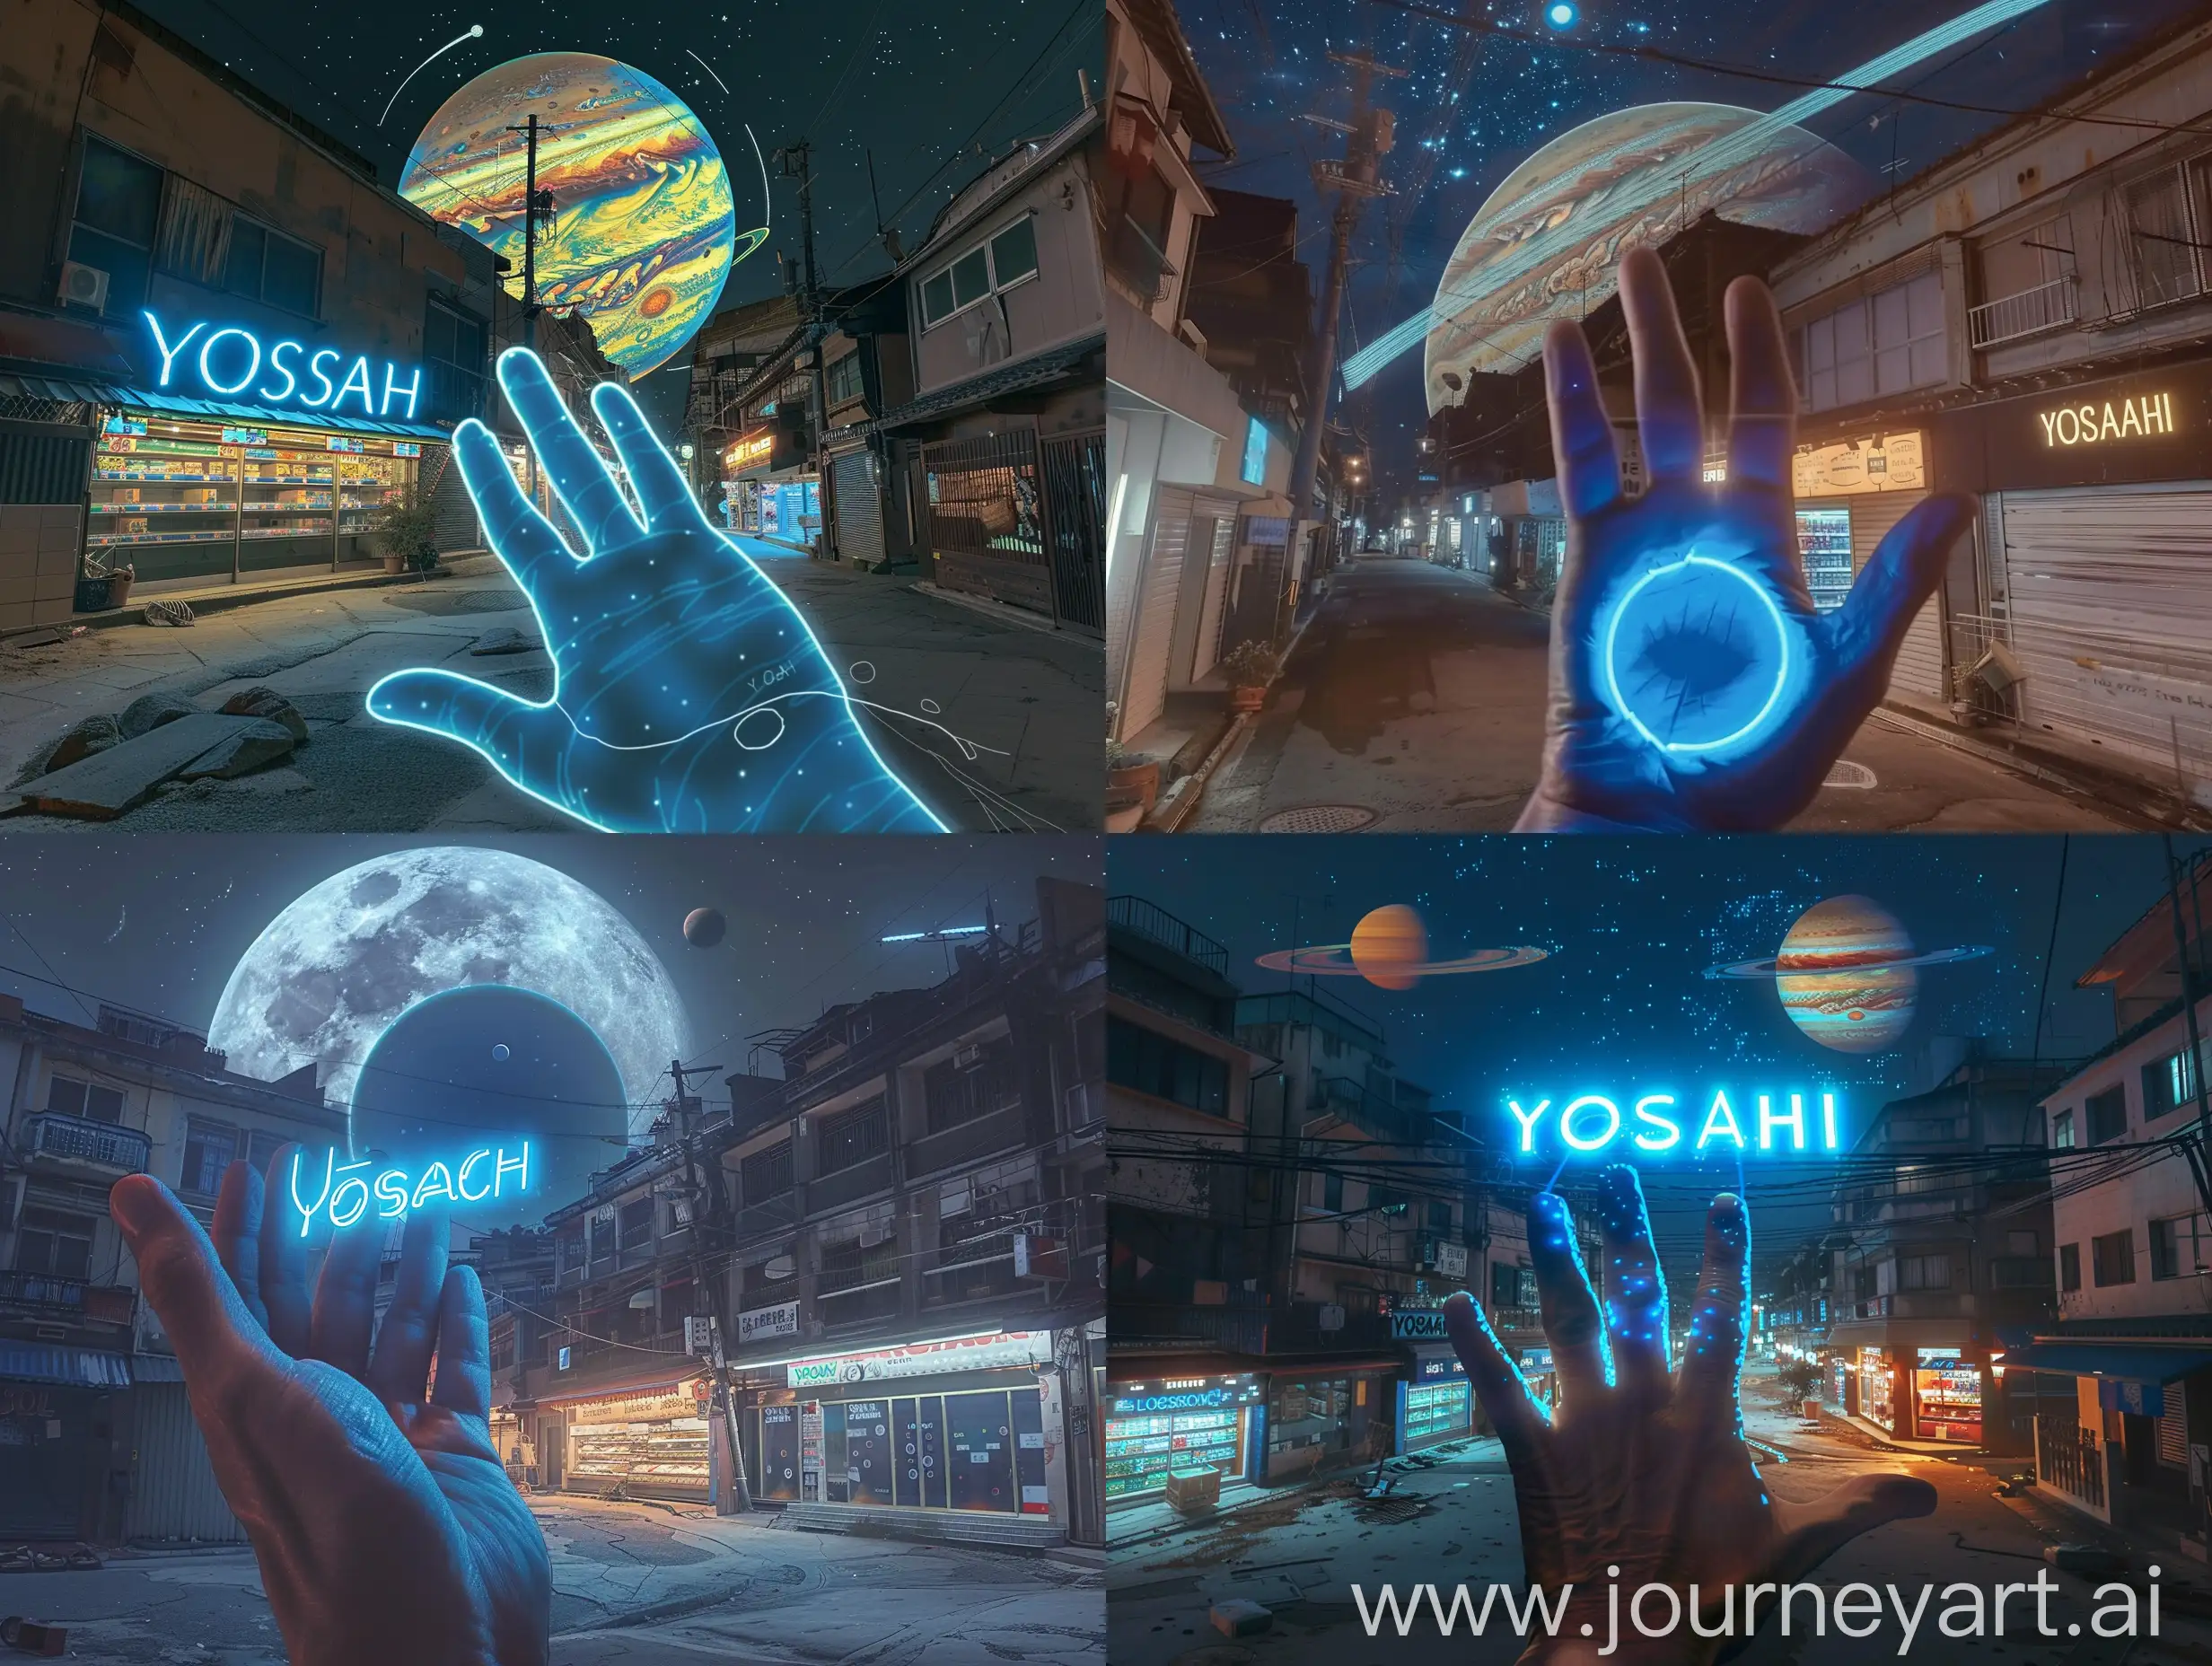 YOSASHI-Supermarket-Illuminated-by-Blue-Neon-Lights-in-a-Retro-Neighborhood-with-Jupiter-in-the-Background